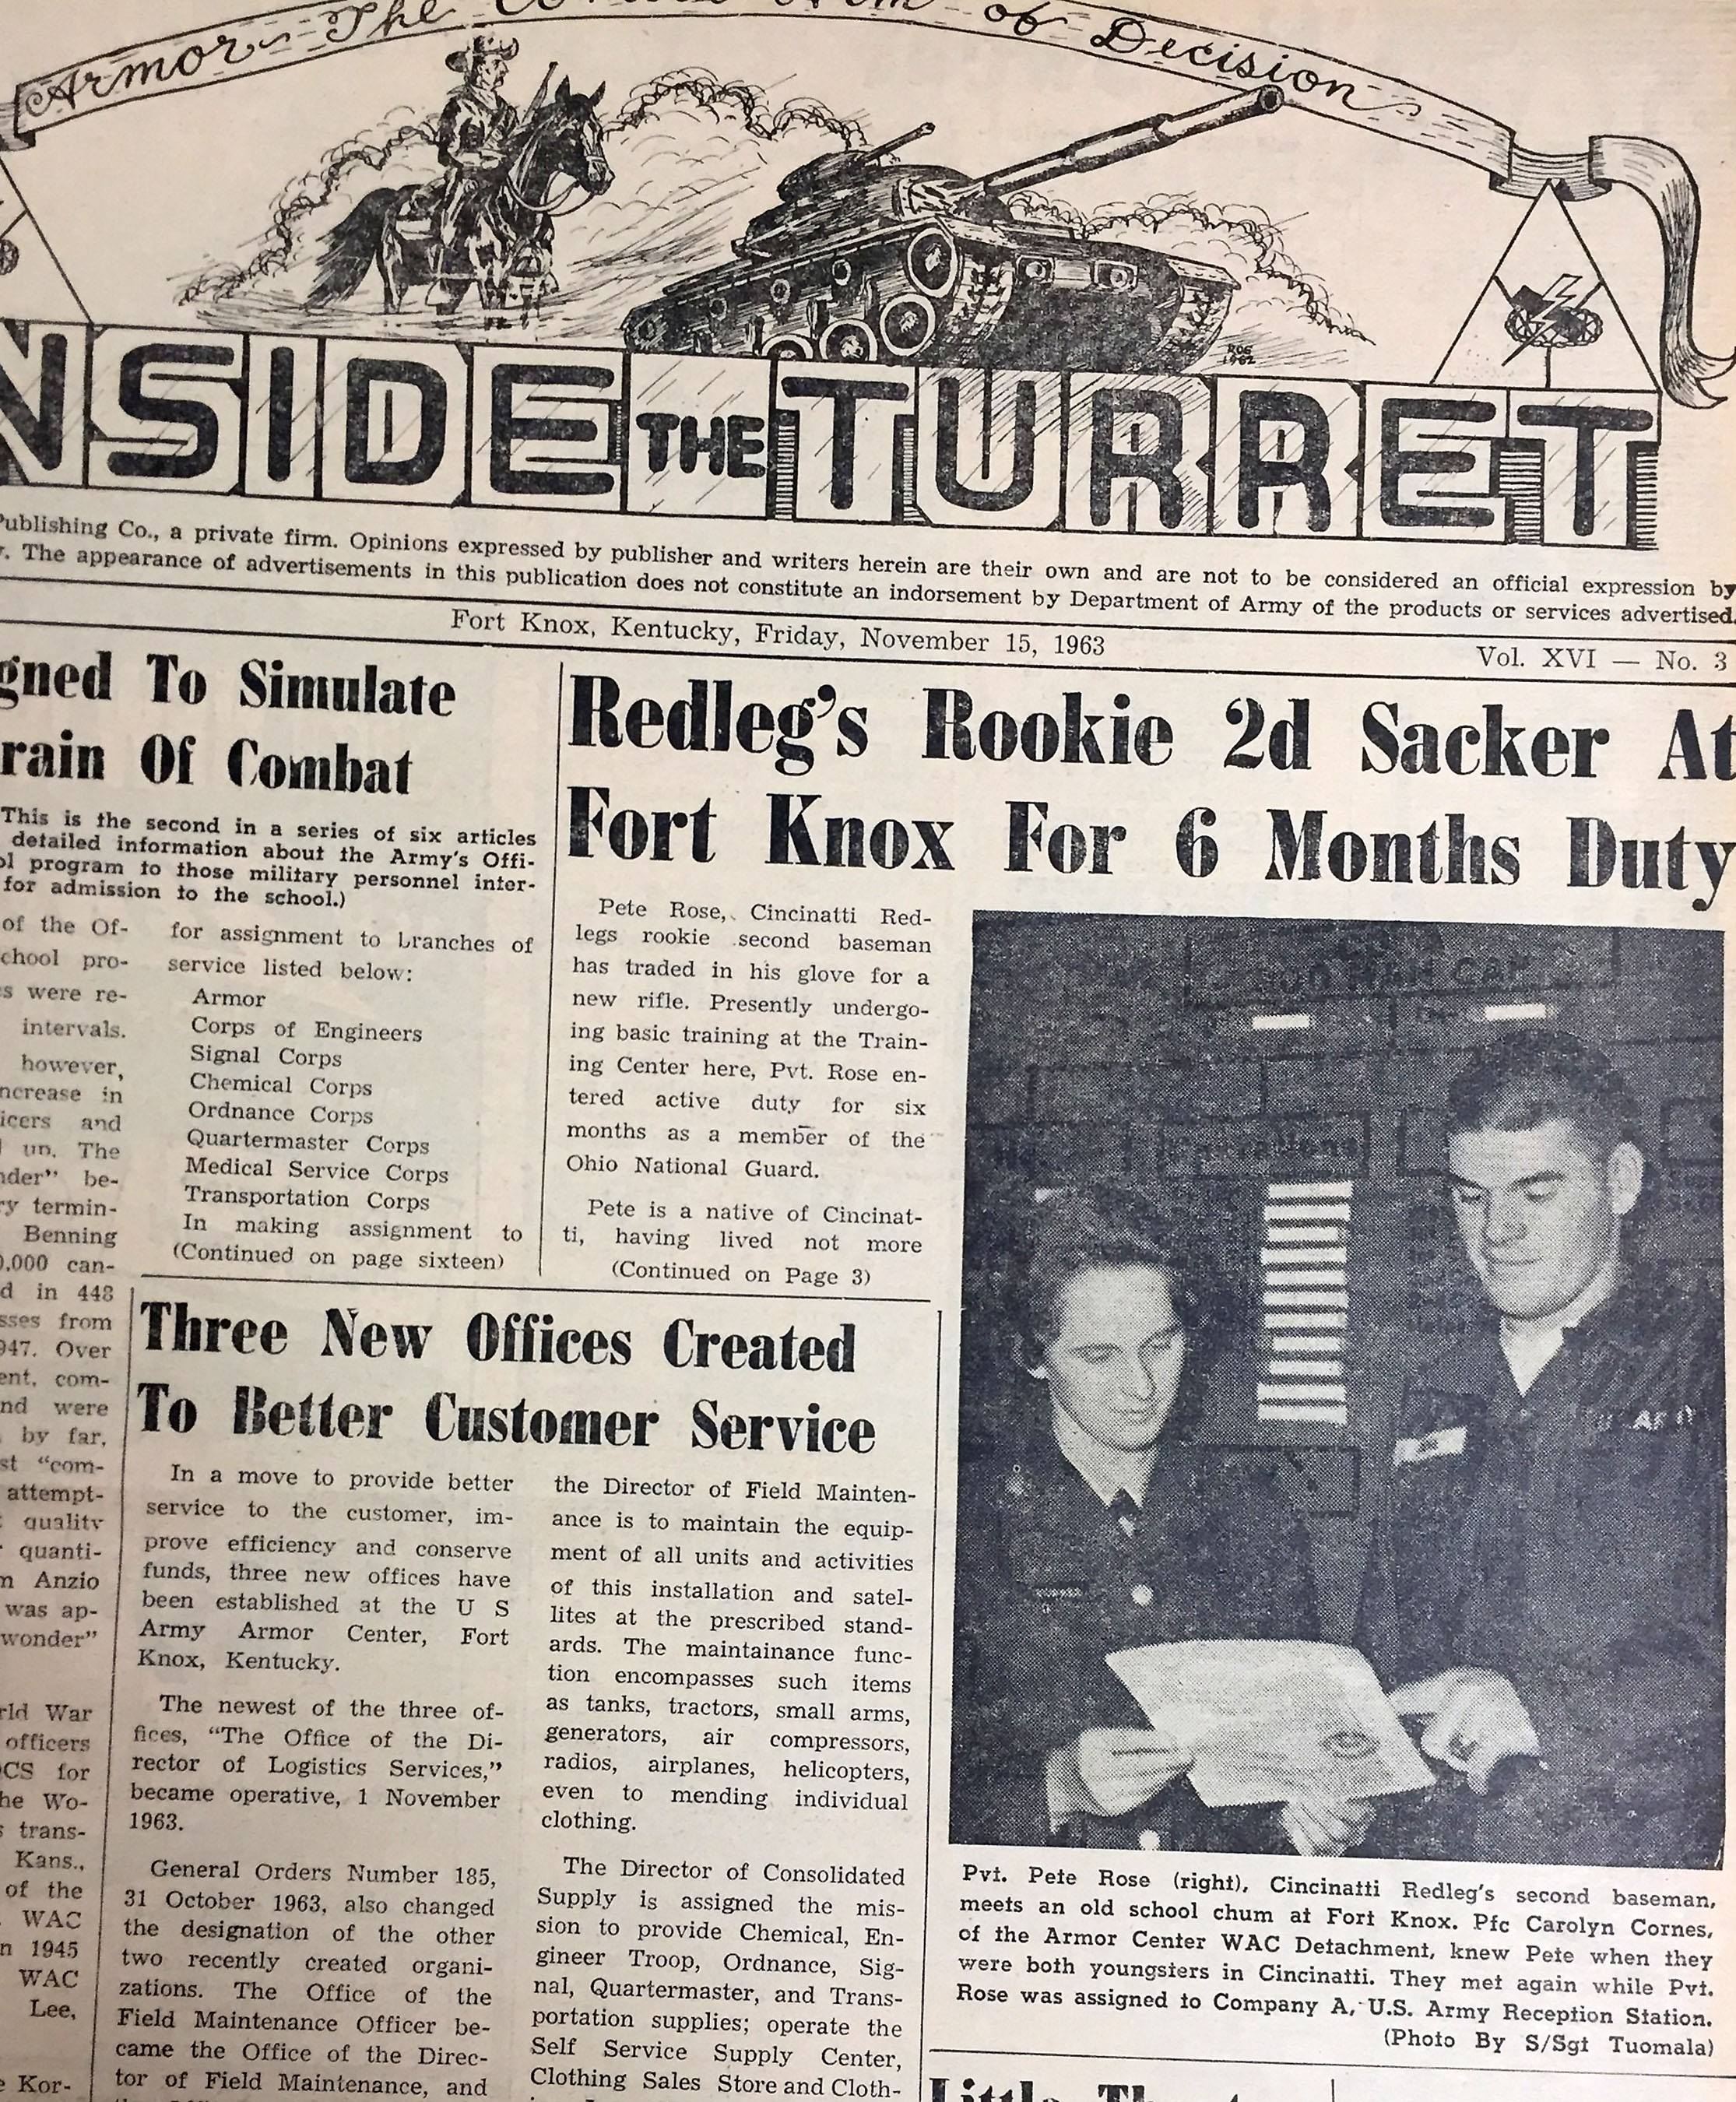 This Month in History: Legendary baseball star Pete Rose joins the Army in  1963, Article